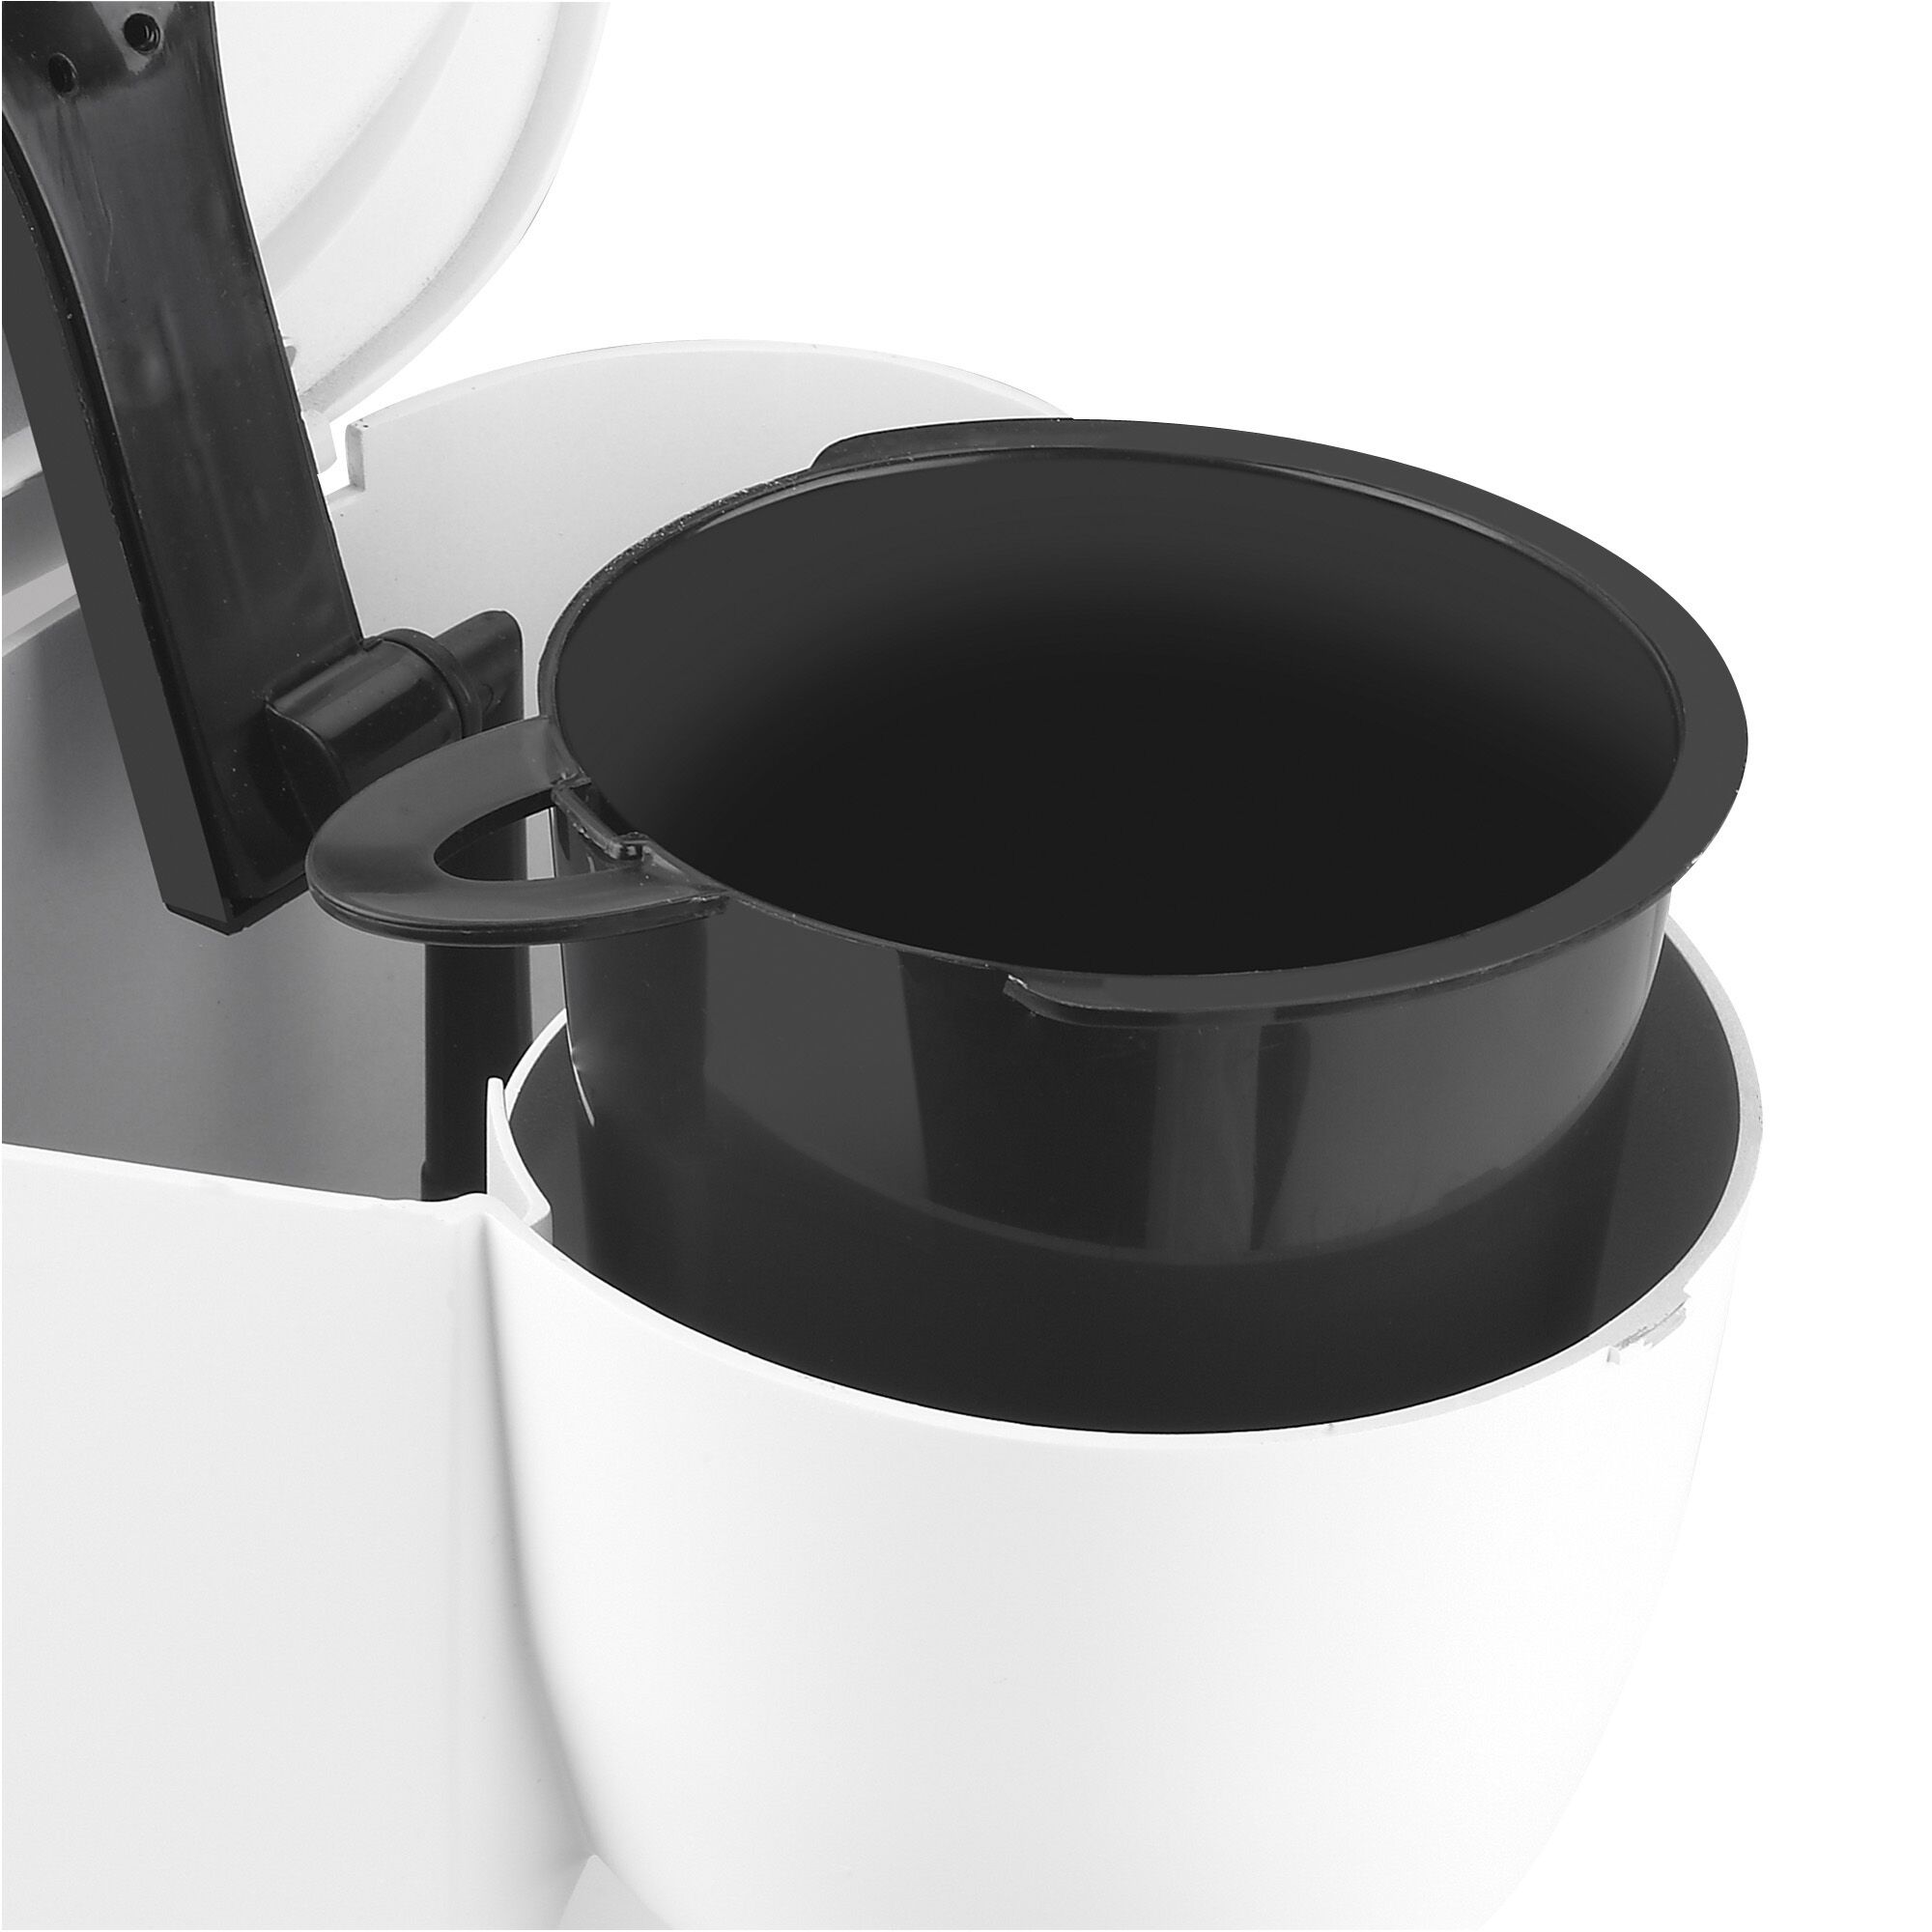 Profile of 5 Cup Coffee Maker.